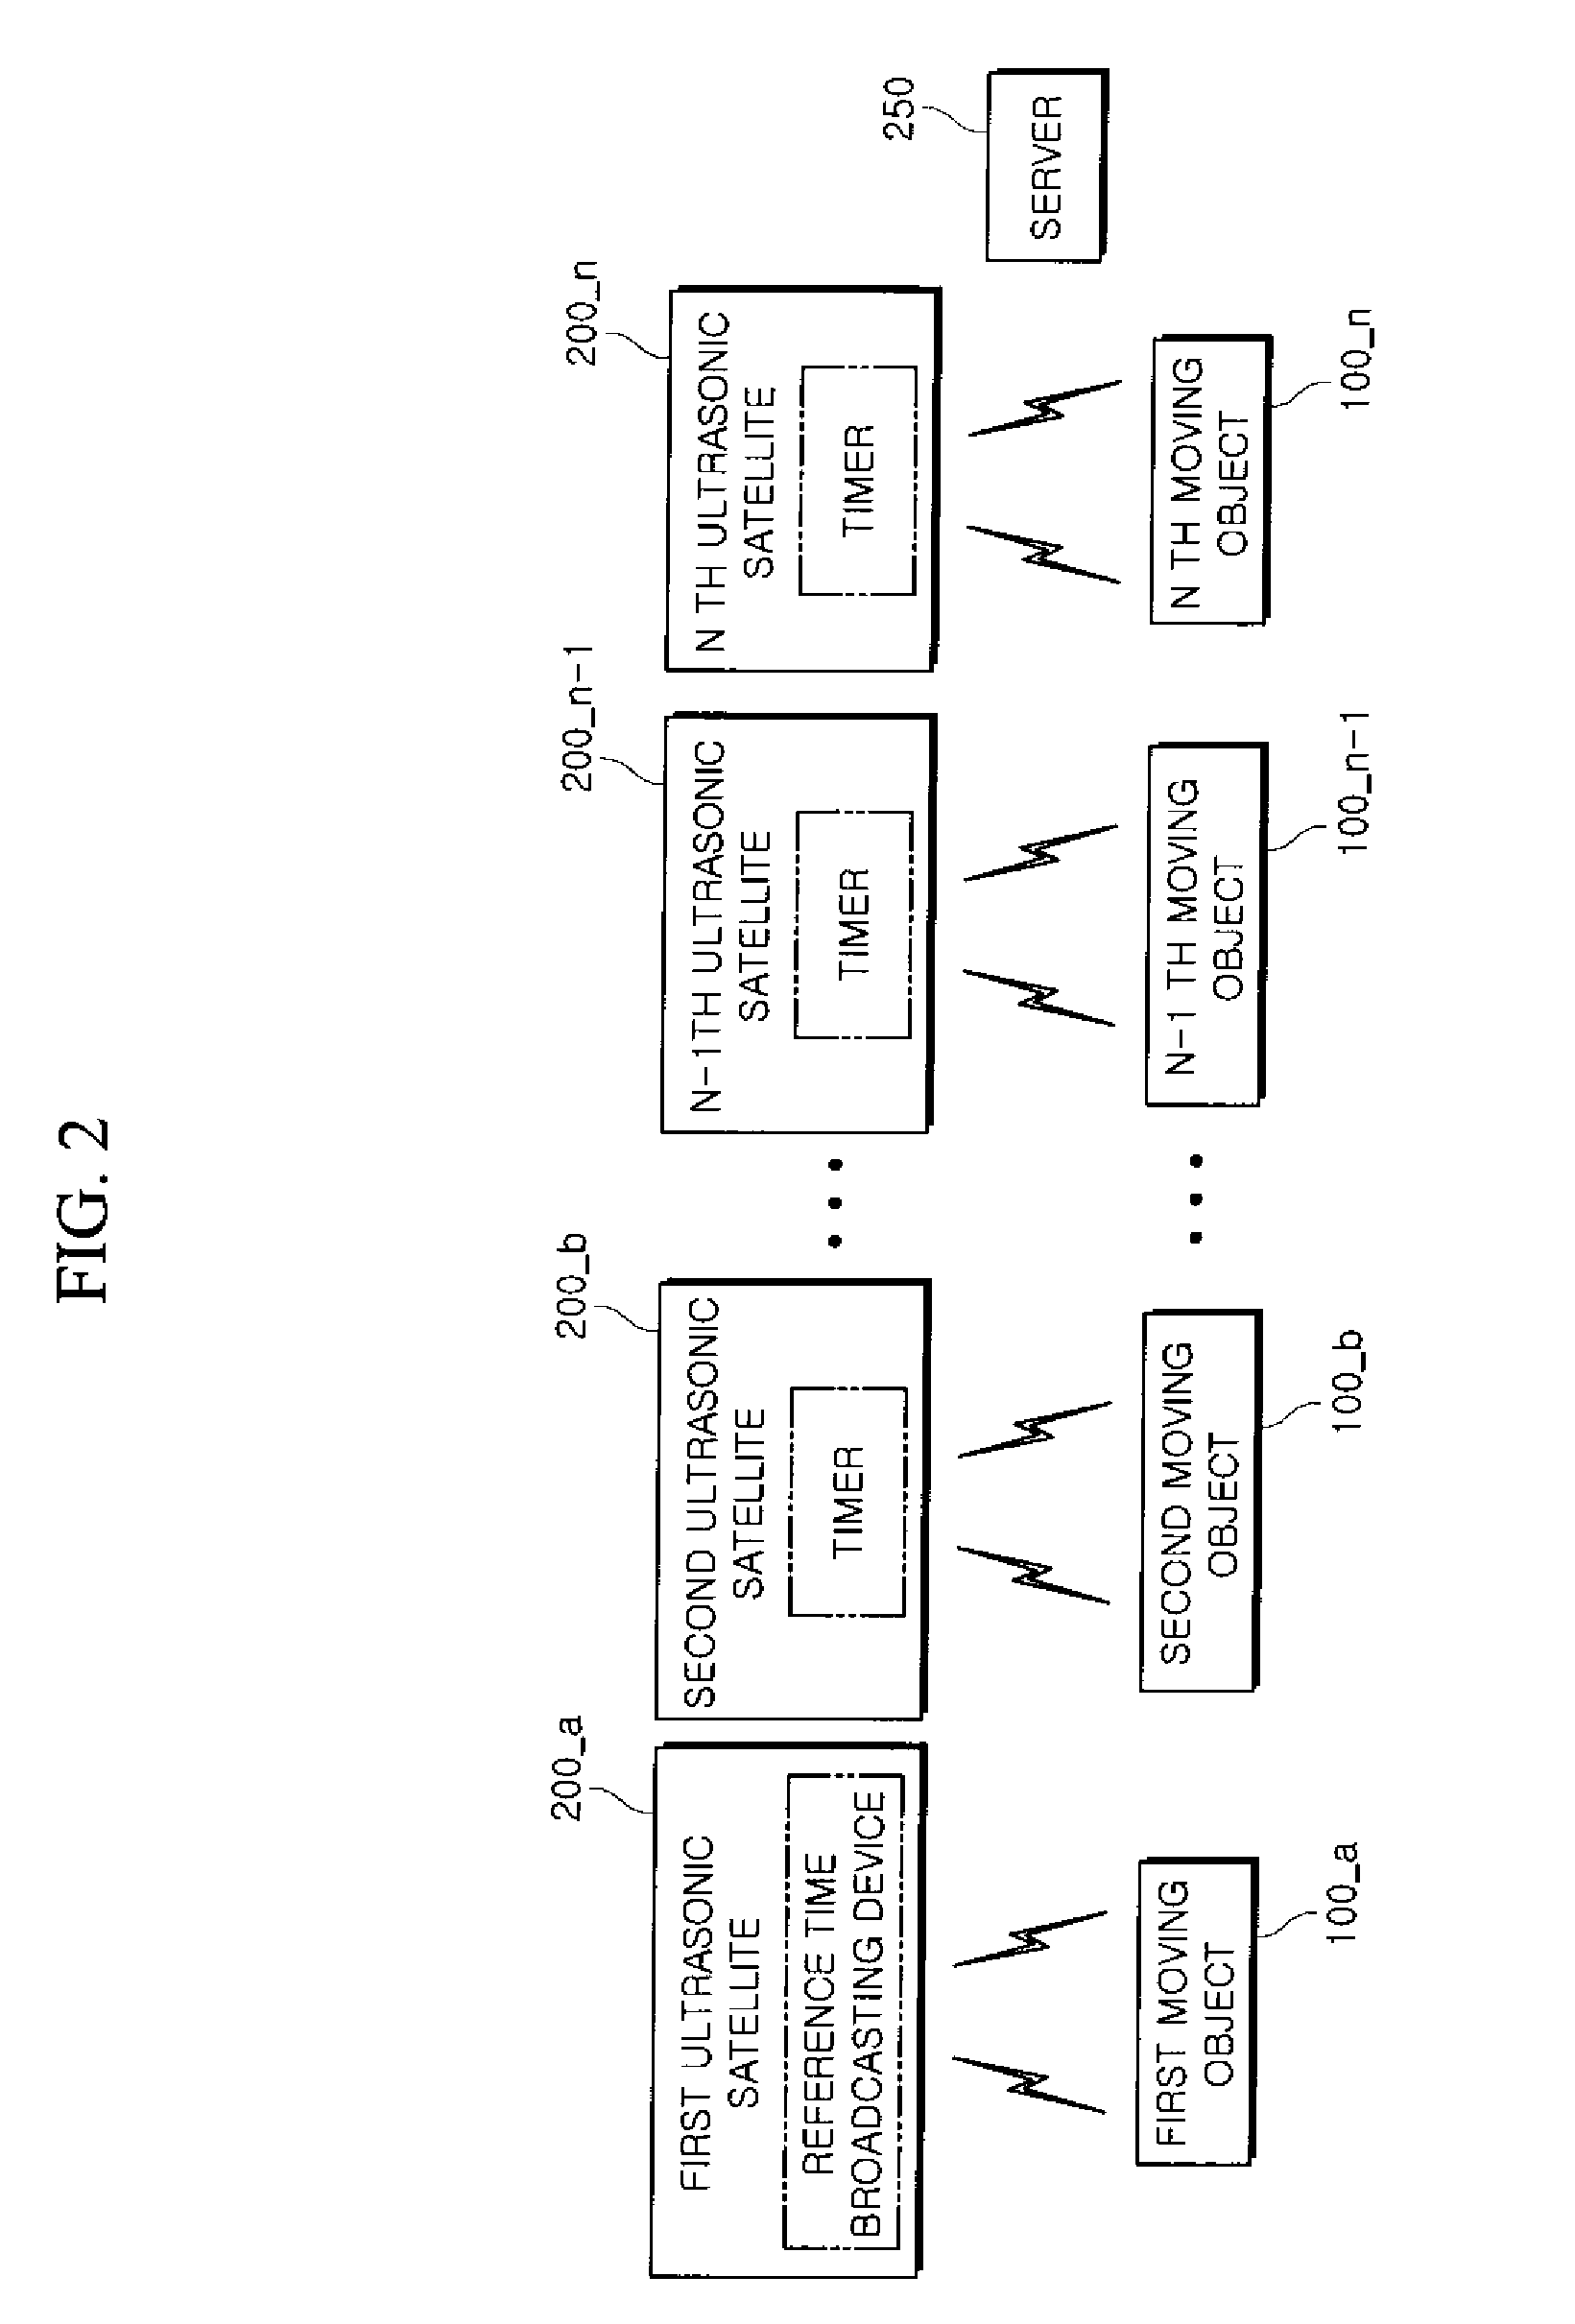 Method and system for recognizing location by using sound sources with different frequencies